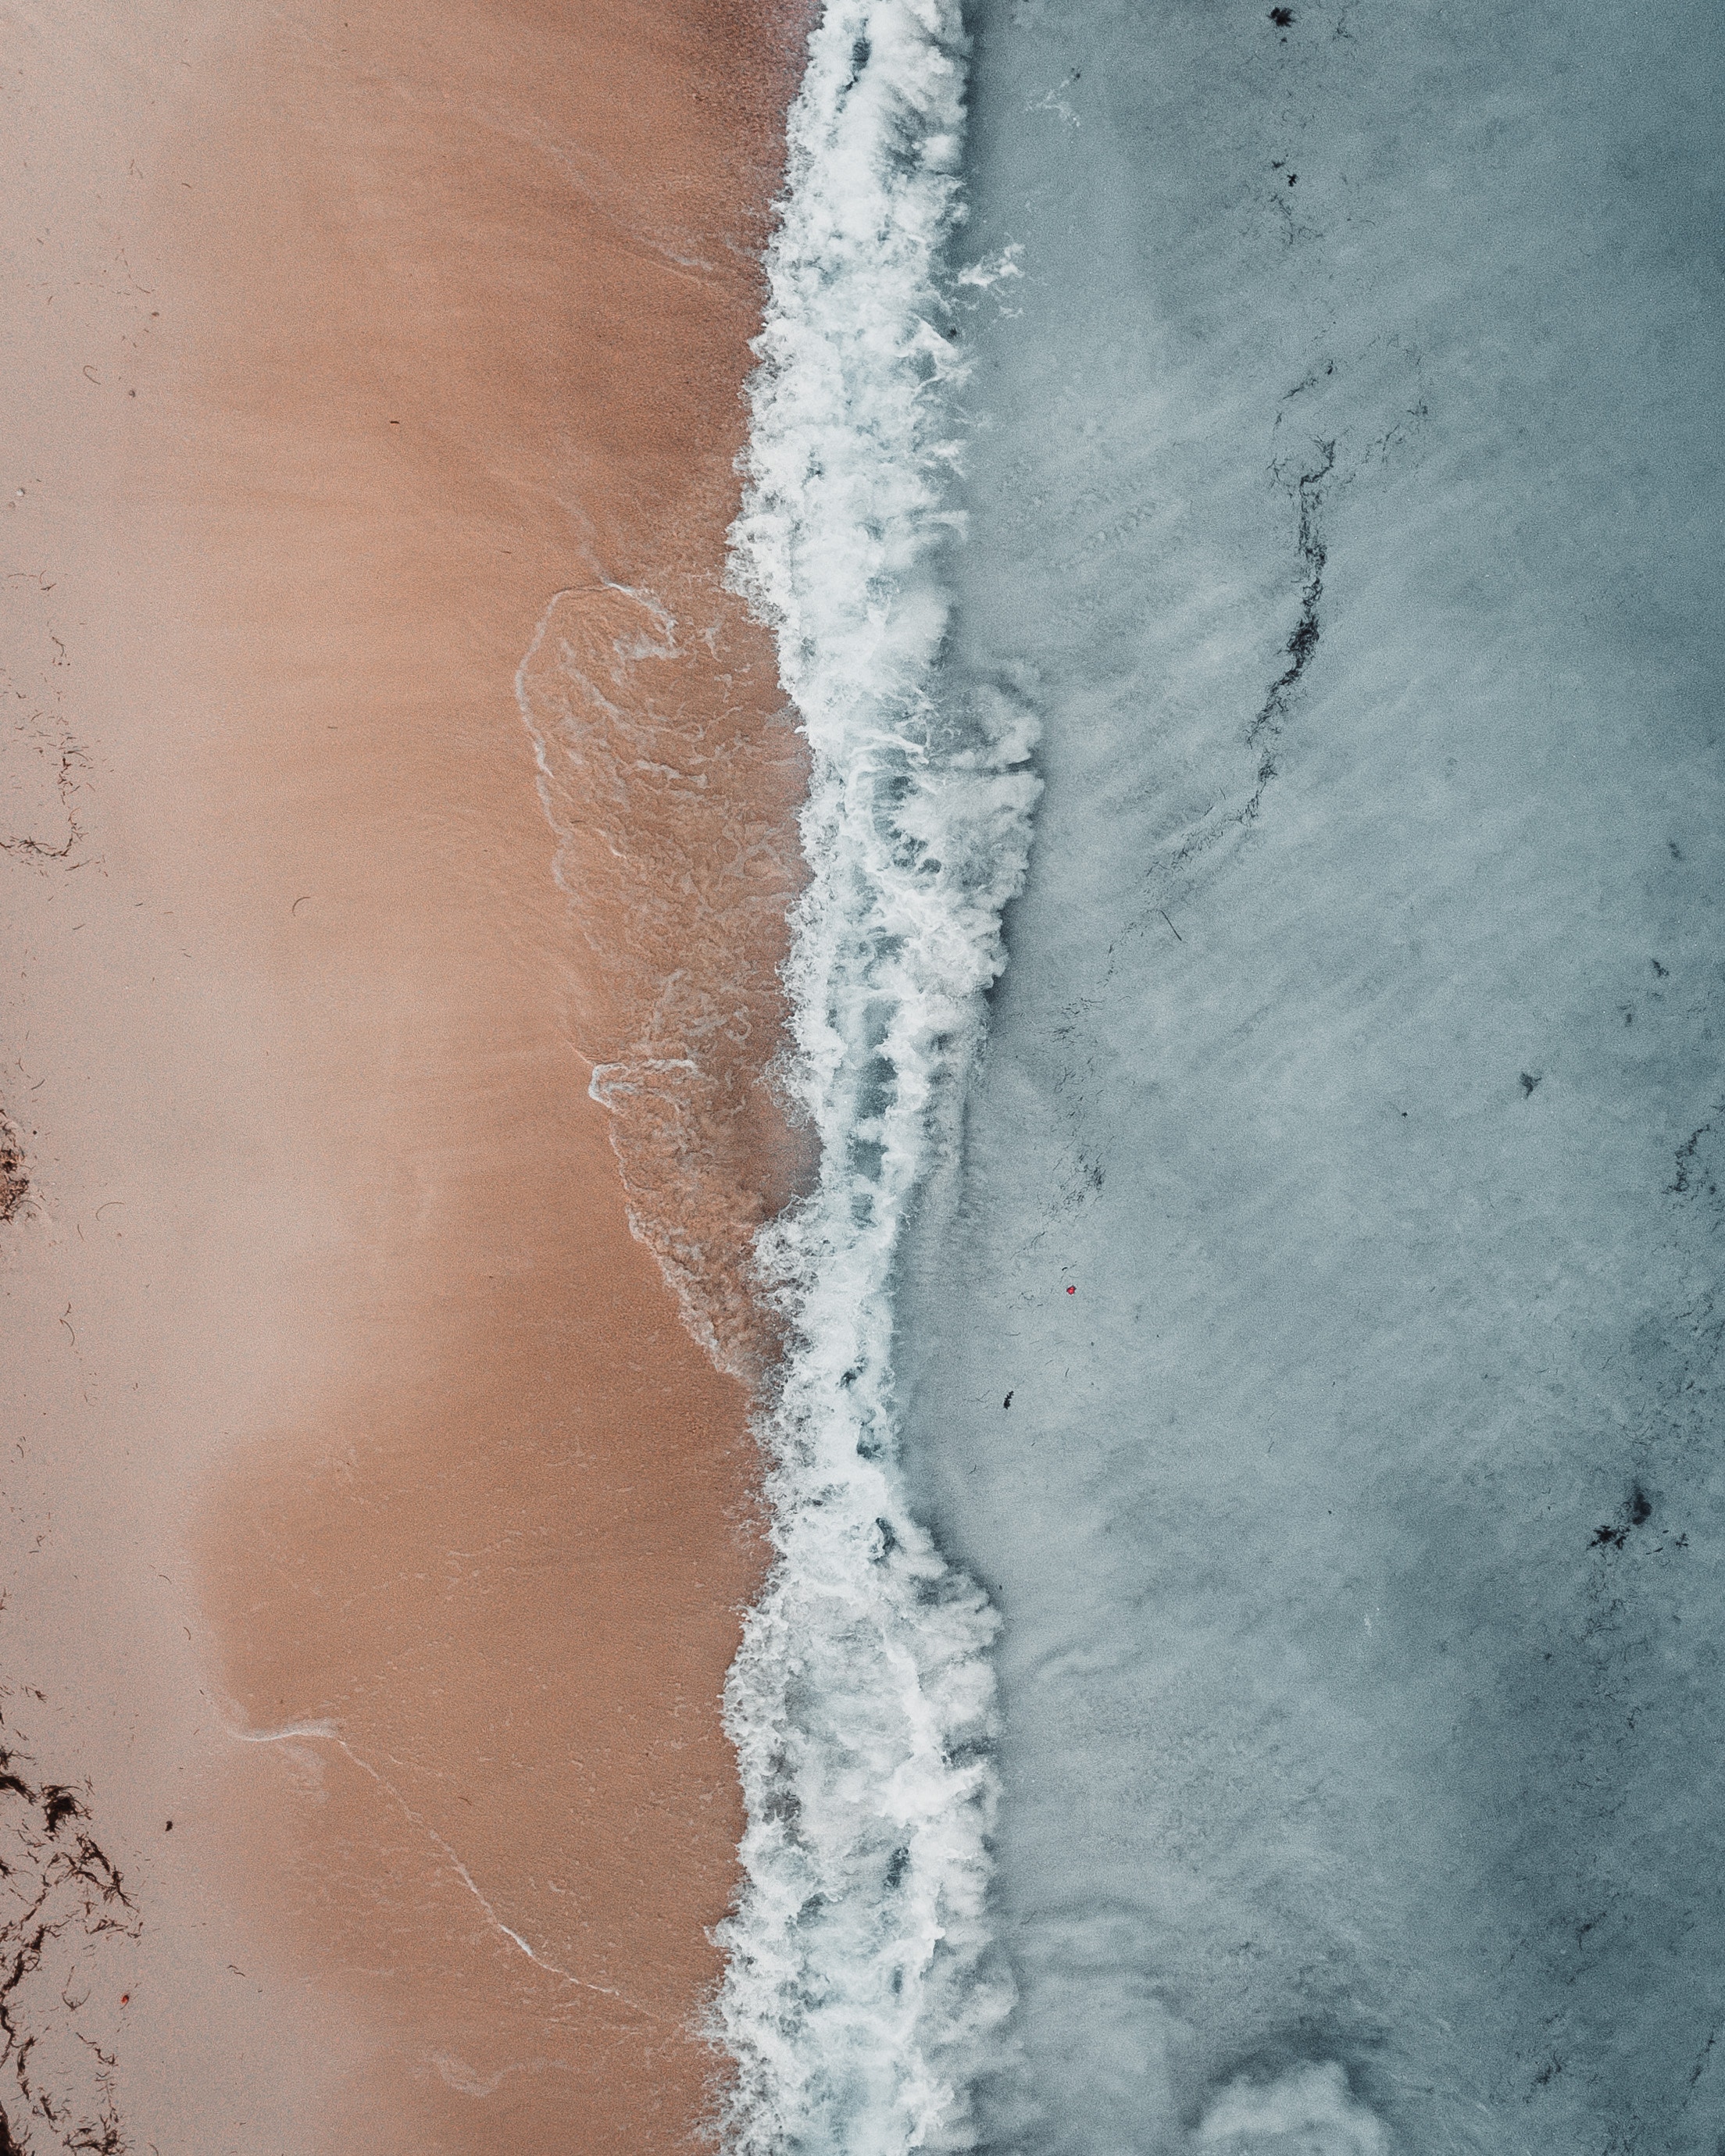 wave, view from above, nature, sand, shore, bank, ocean, surf Full HD